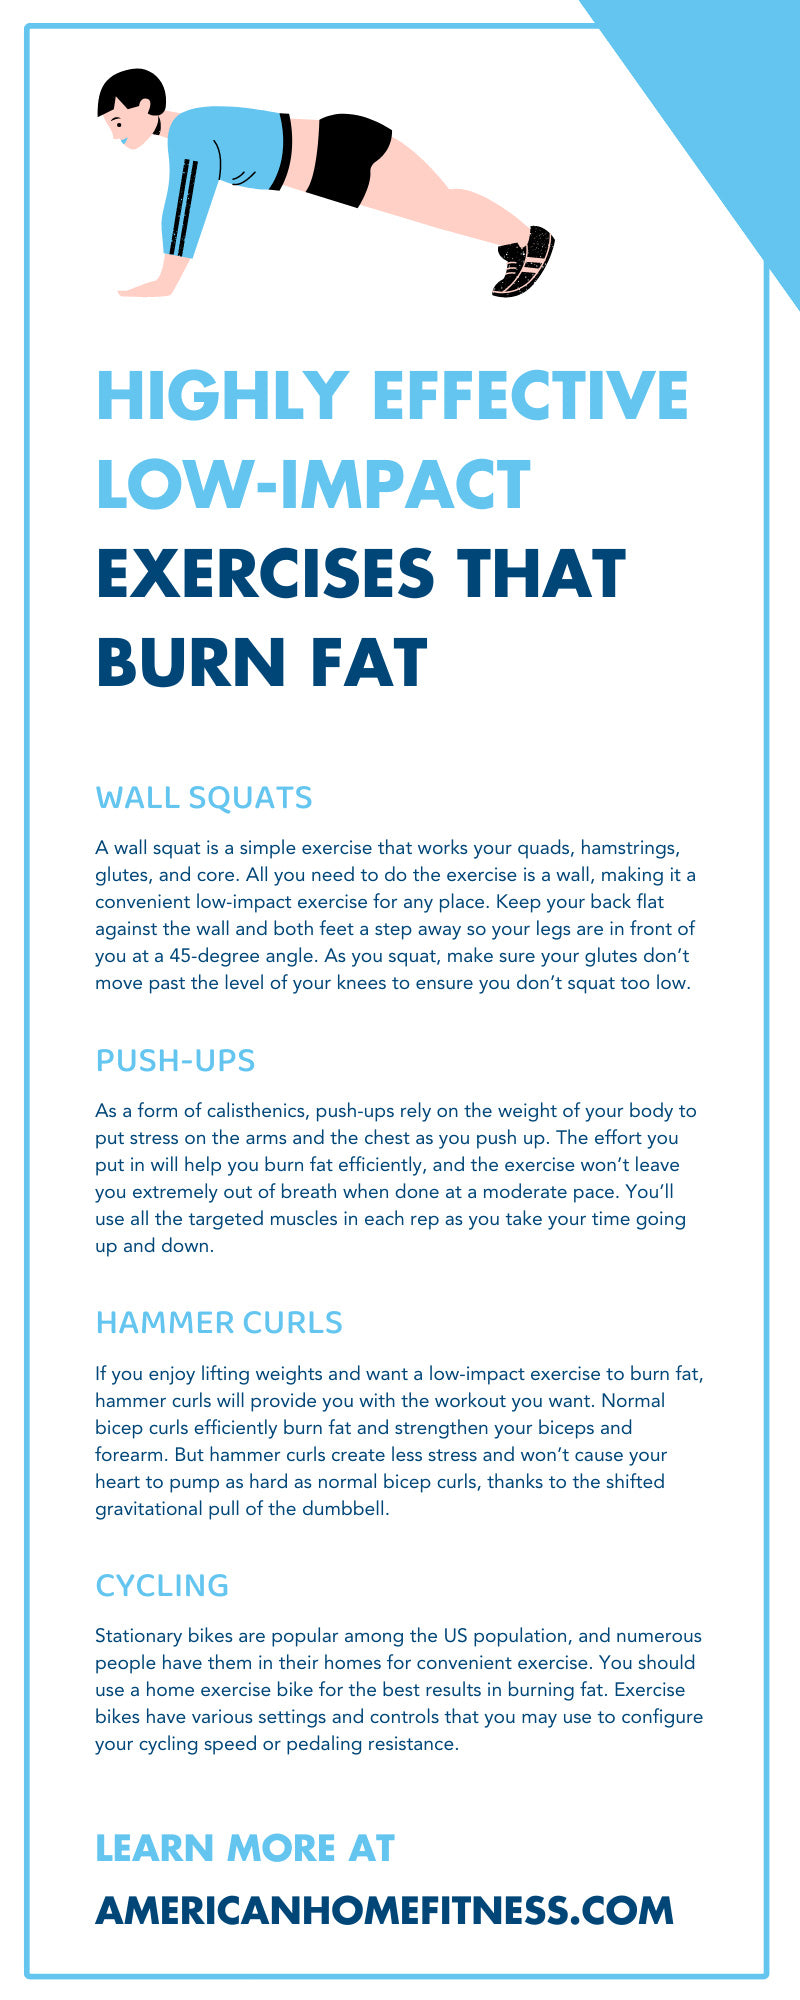 Weight Loss Equipment to Increase Workout Intensity and Fat Burning